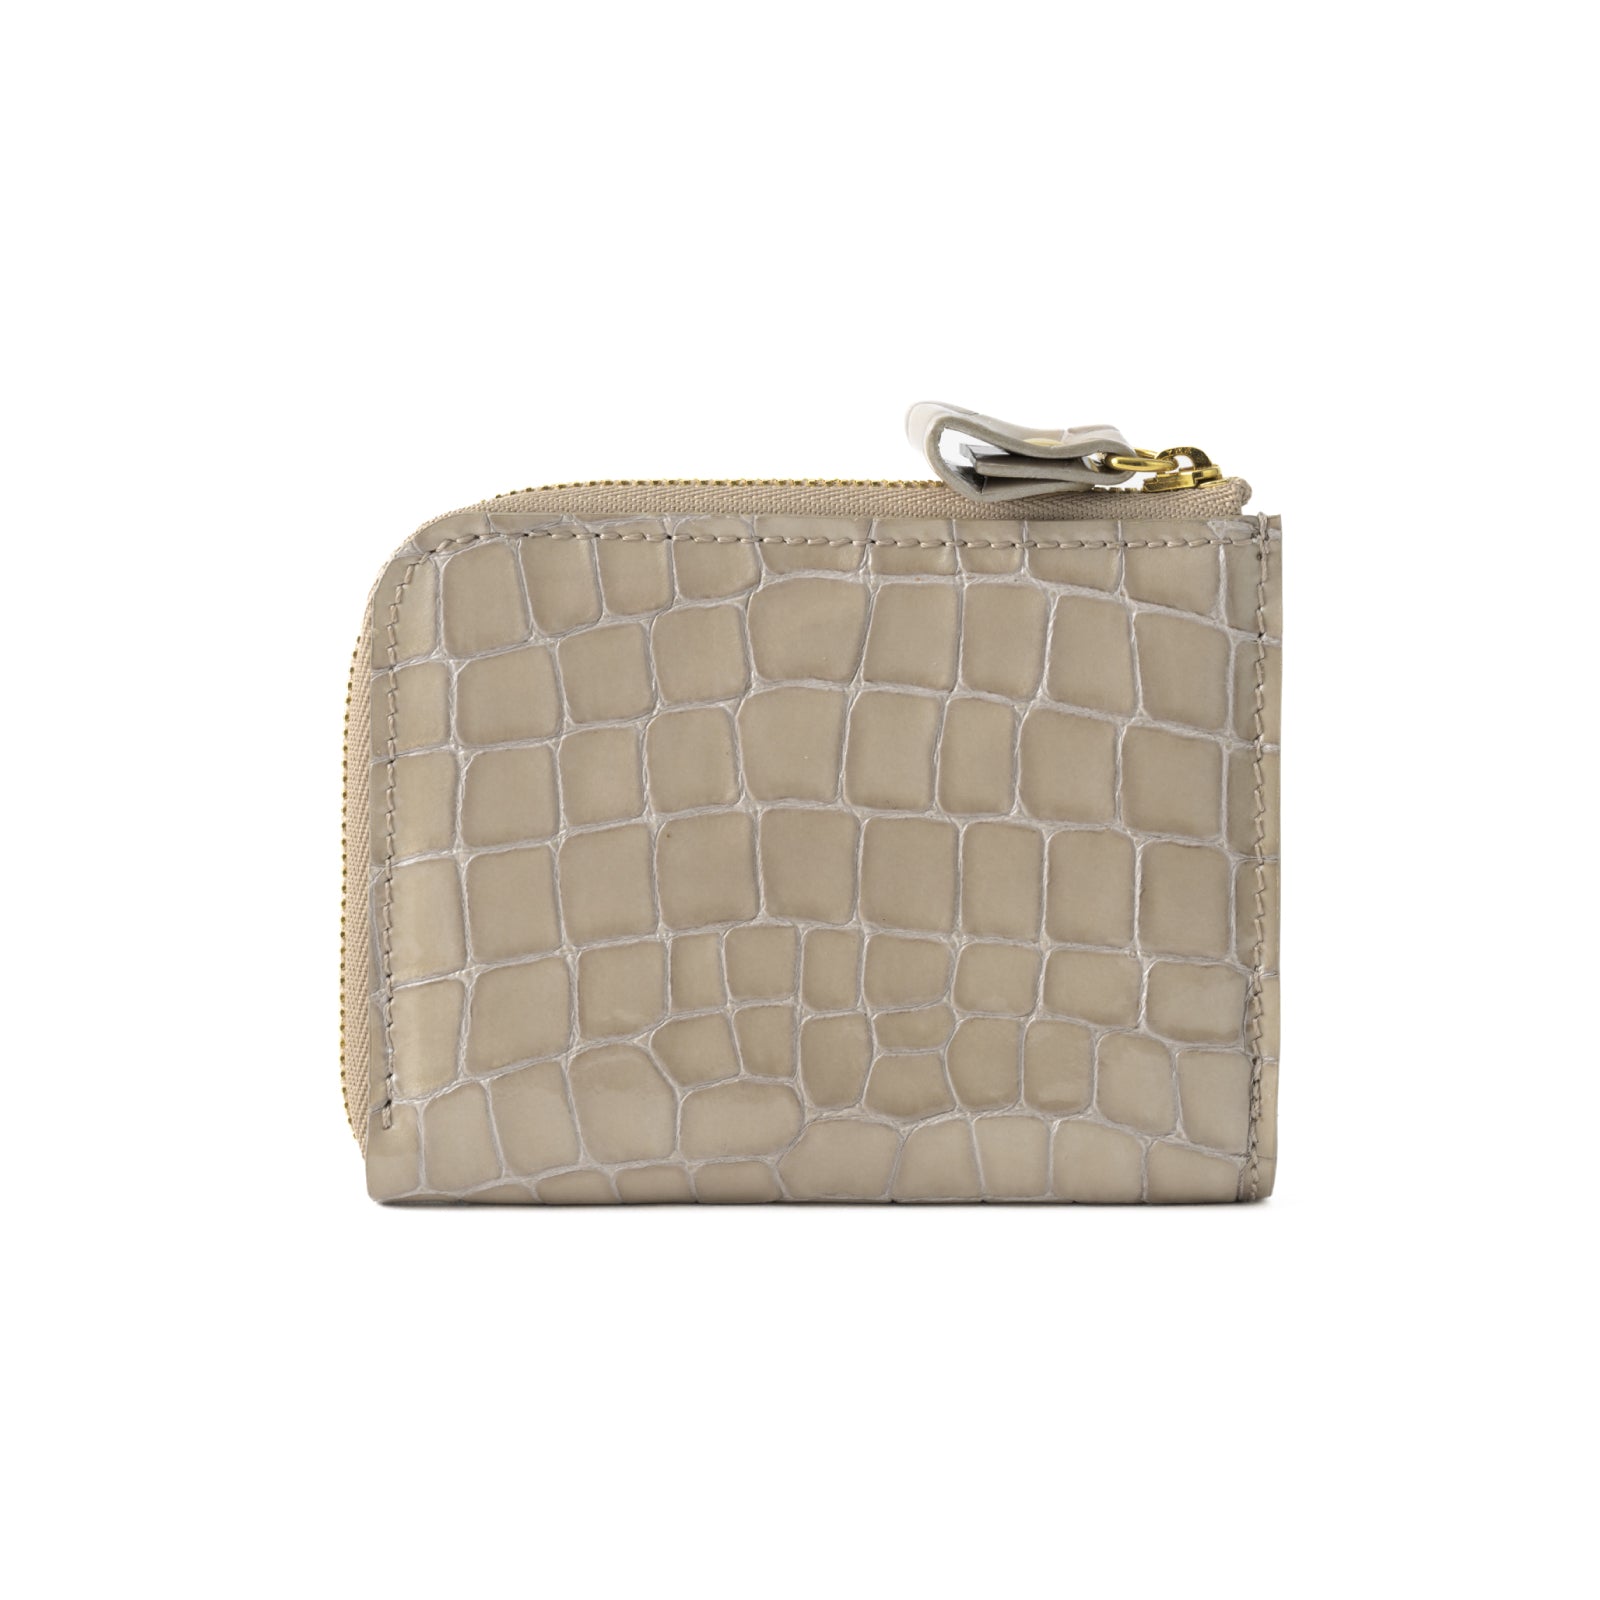 L-shaped zipper minimal wallet in Chromer leather / Tourtiere